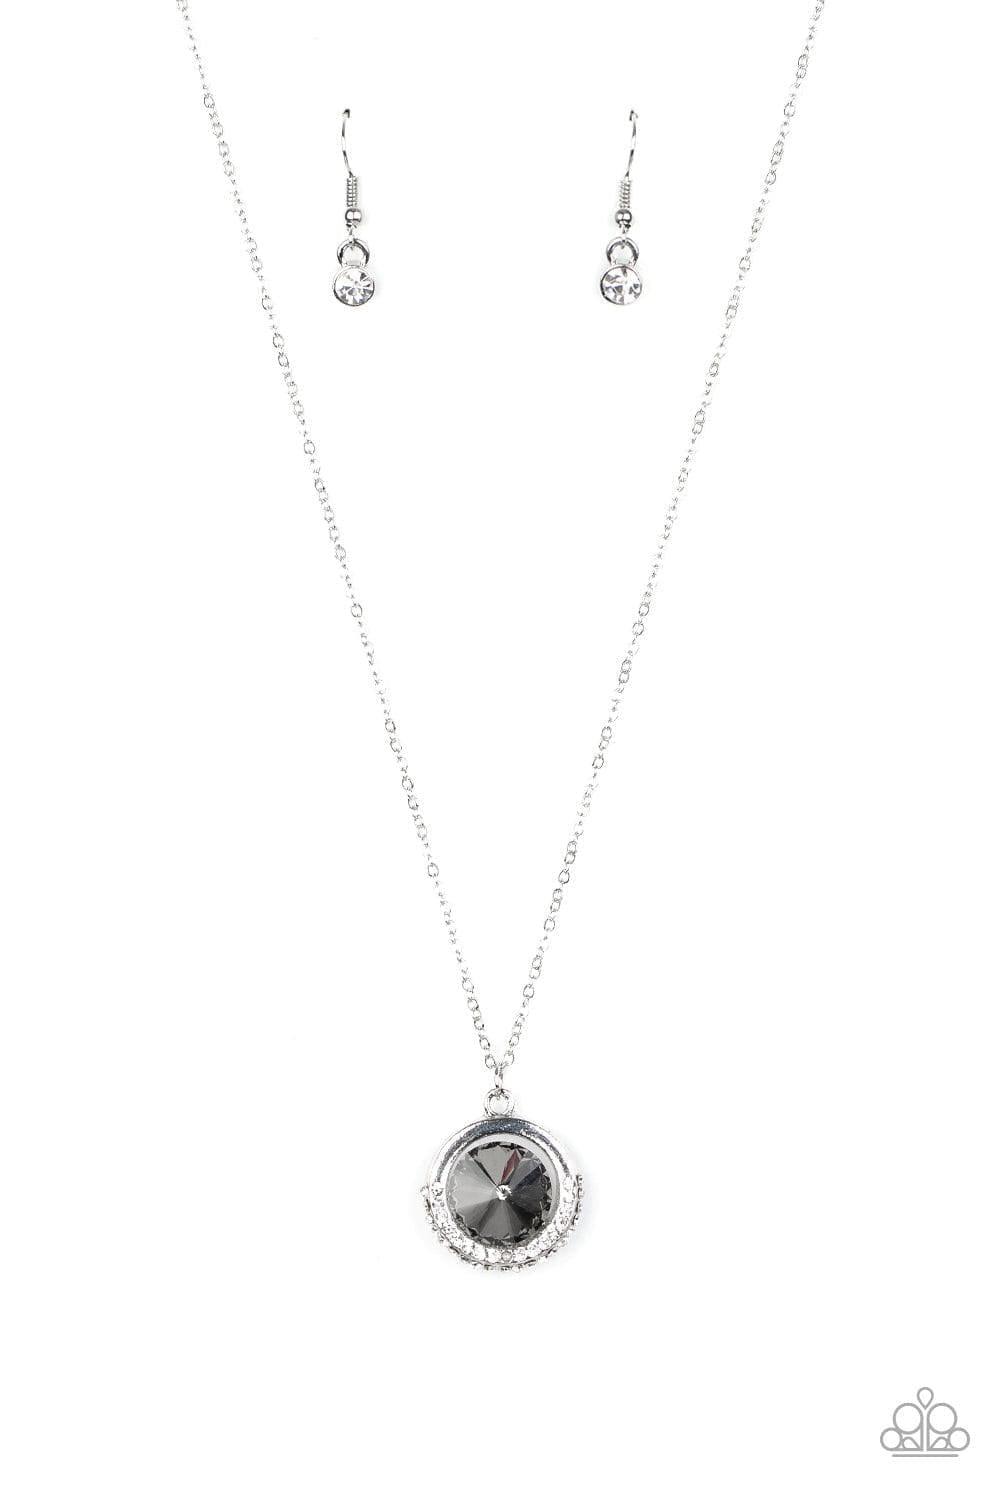 Paparazzi Accessories - Trademark Twinkle - Silver Necklace - Bling by JessieK